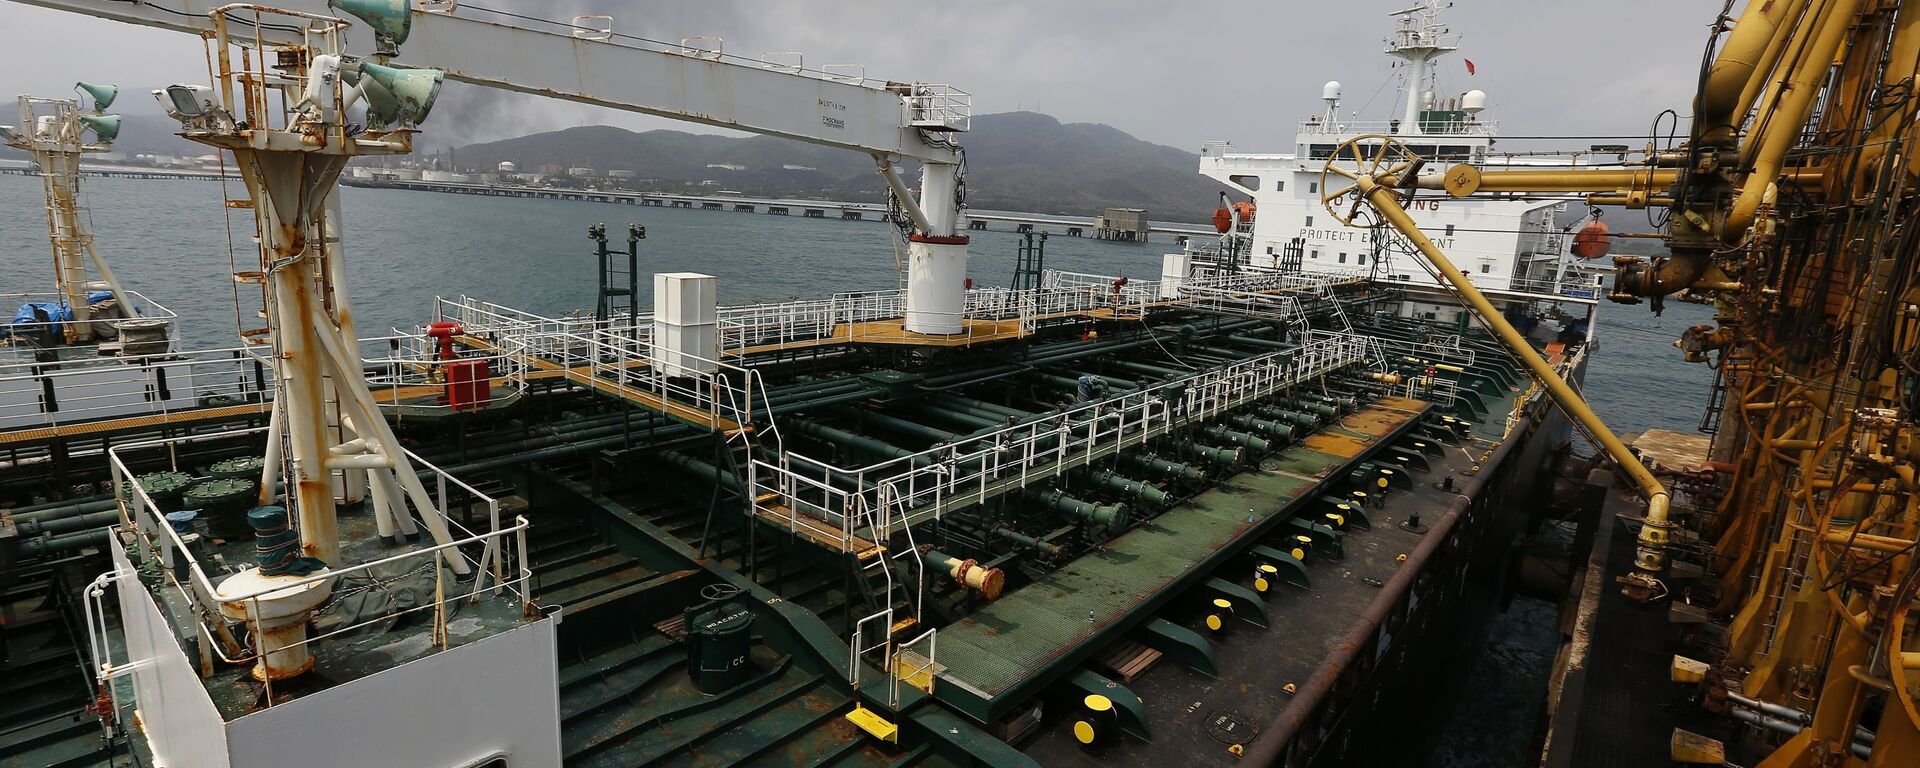 Iranian oil tanker Fortune is anchored at the dock of the El Palito refinery near Puerto Cabello, Venezuela, Monday, May 25, 2020 - Sputnik International, 1920, 14.12.2022